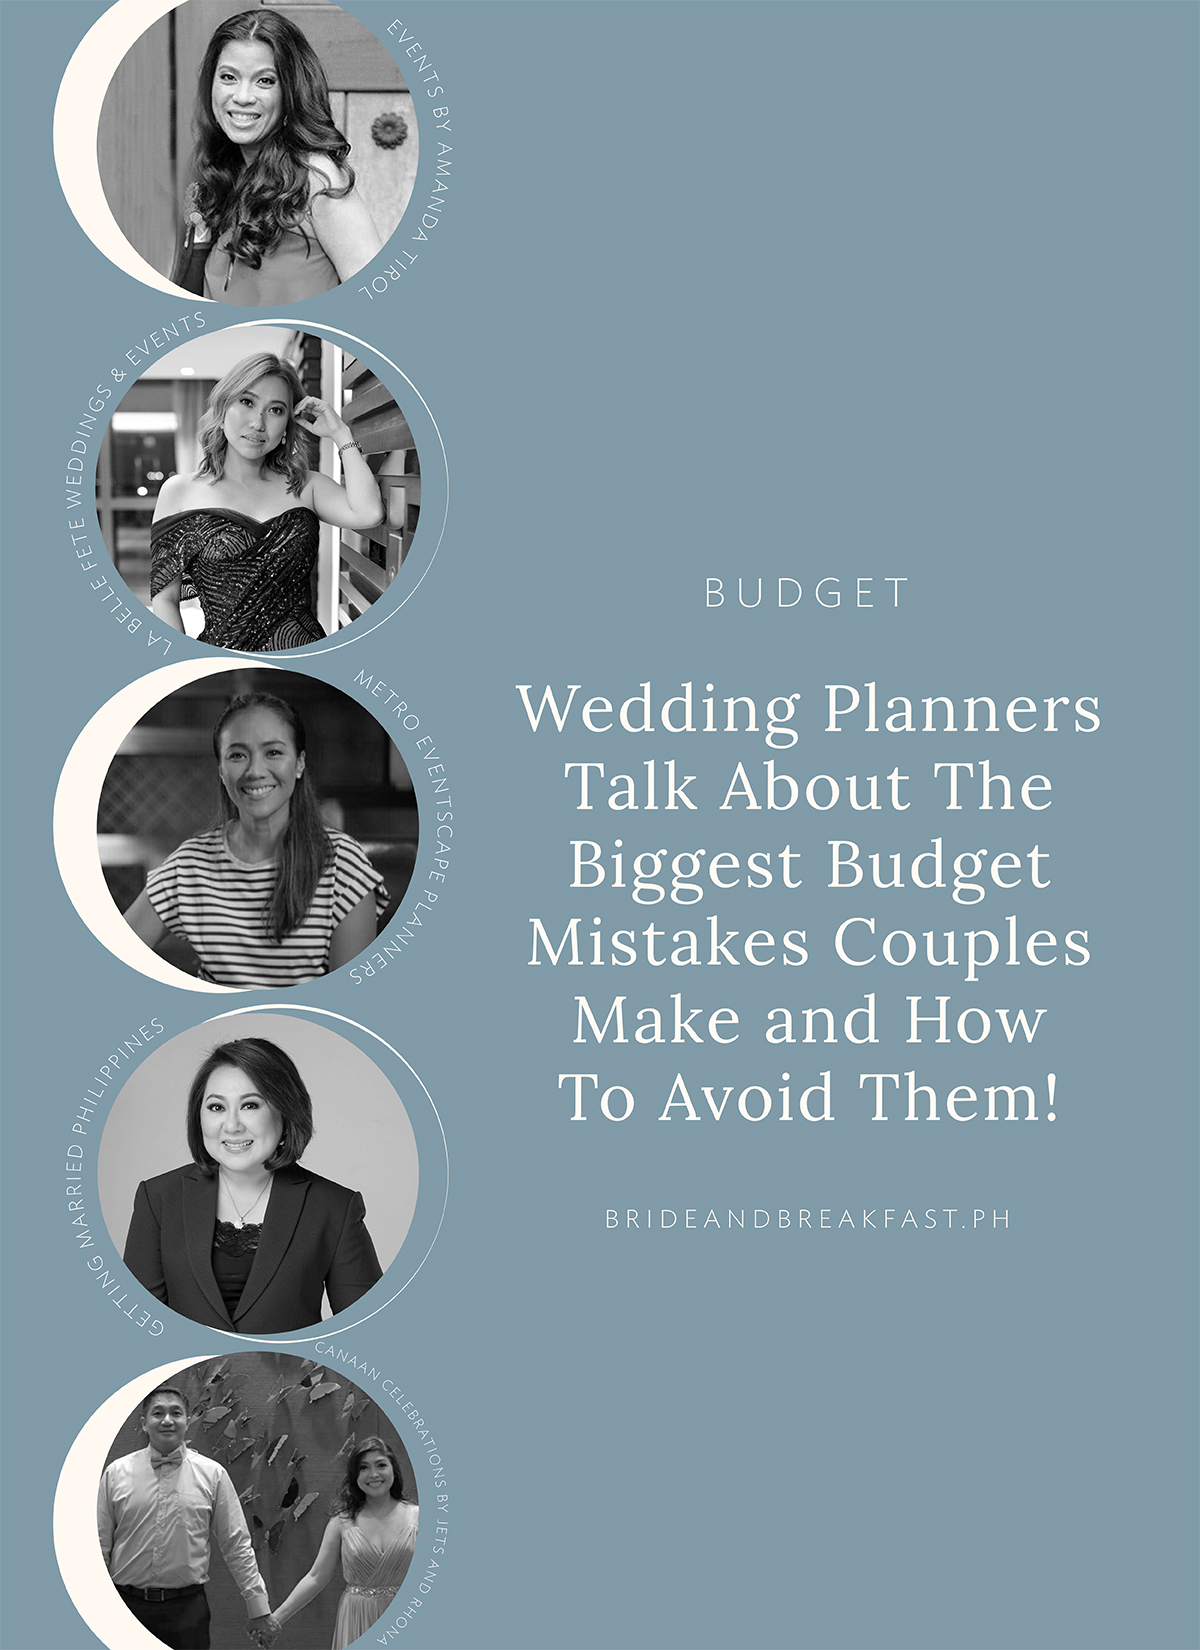 Wedding Planners Talk About The Biggest Budget Mistakes Couples Make and How To Avoid Them!